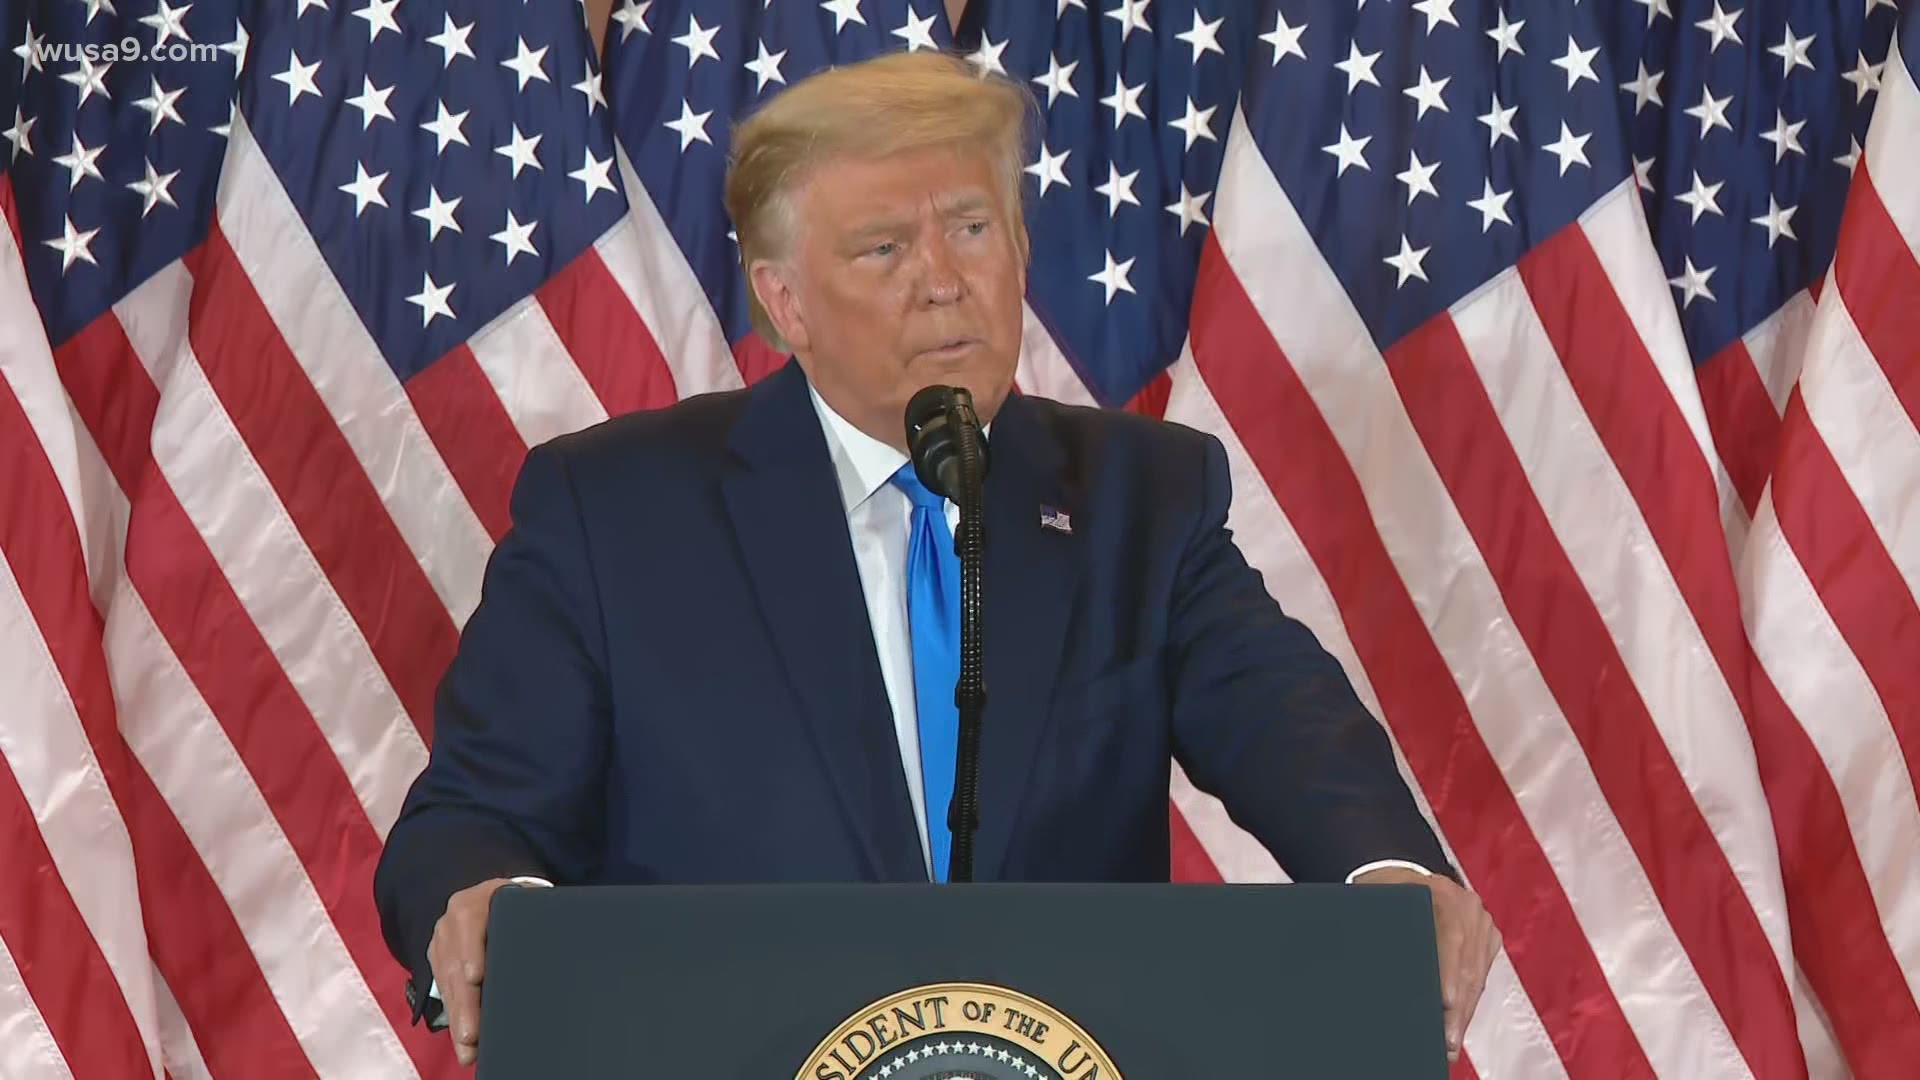 President Trump falsely claims a win in Georgia, as a projected winner has not been called there by WUSA9 or its news partners, the AP and CBS.